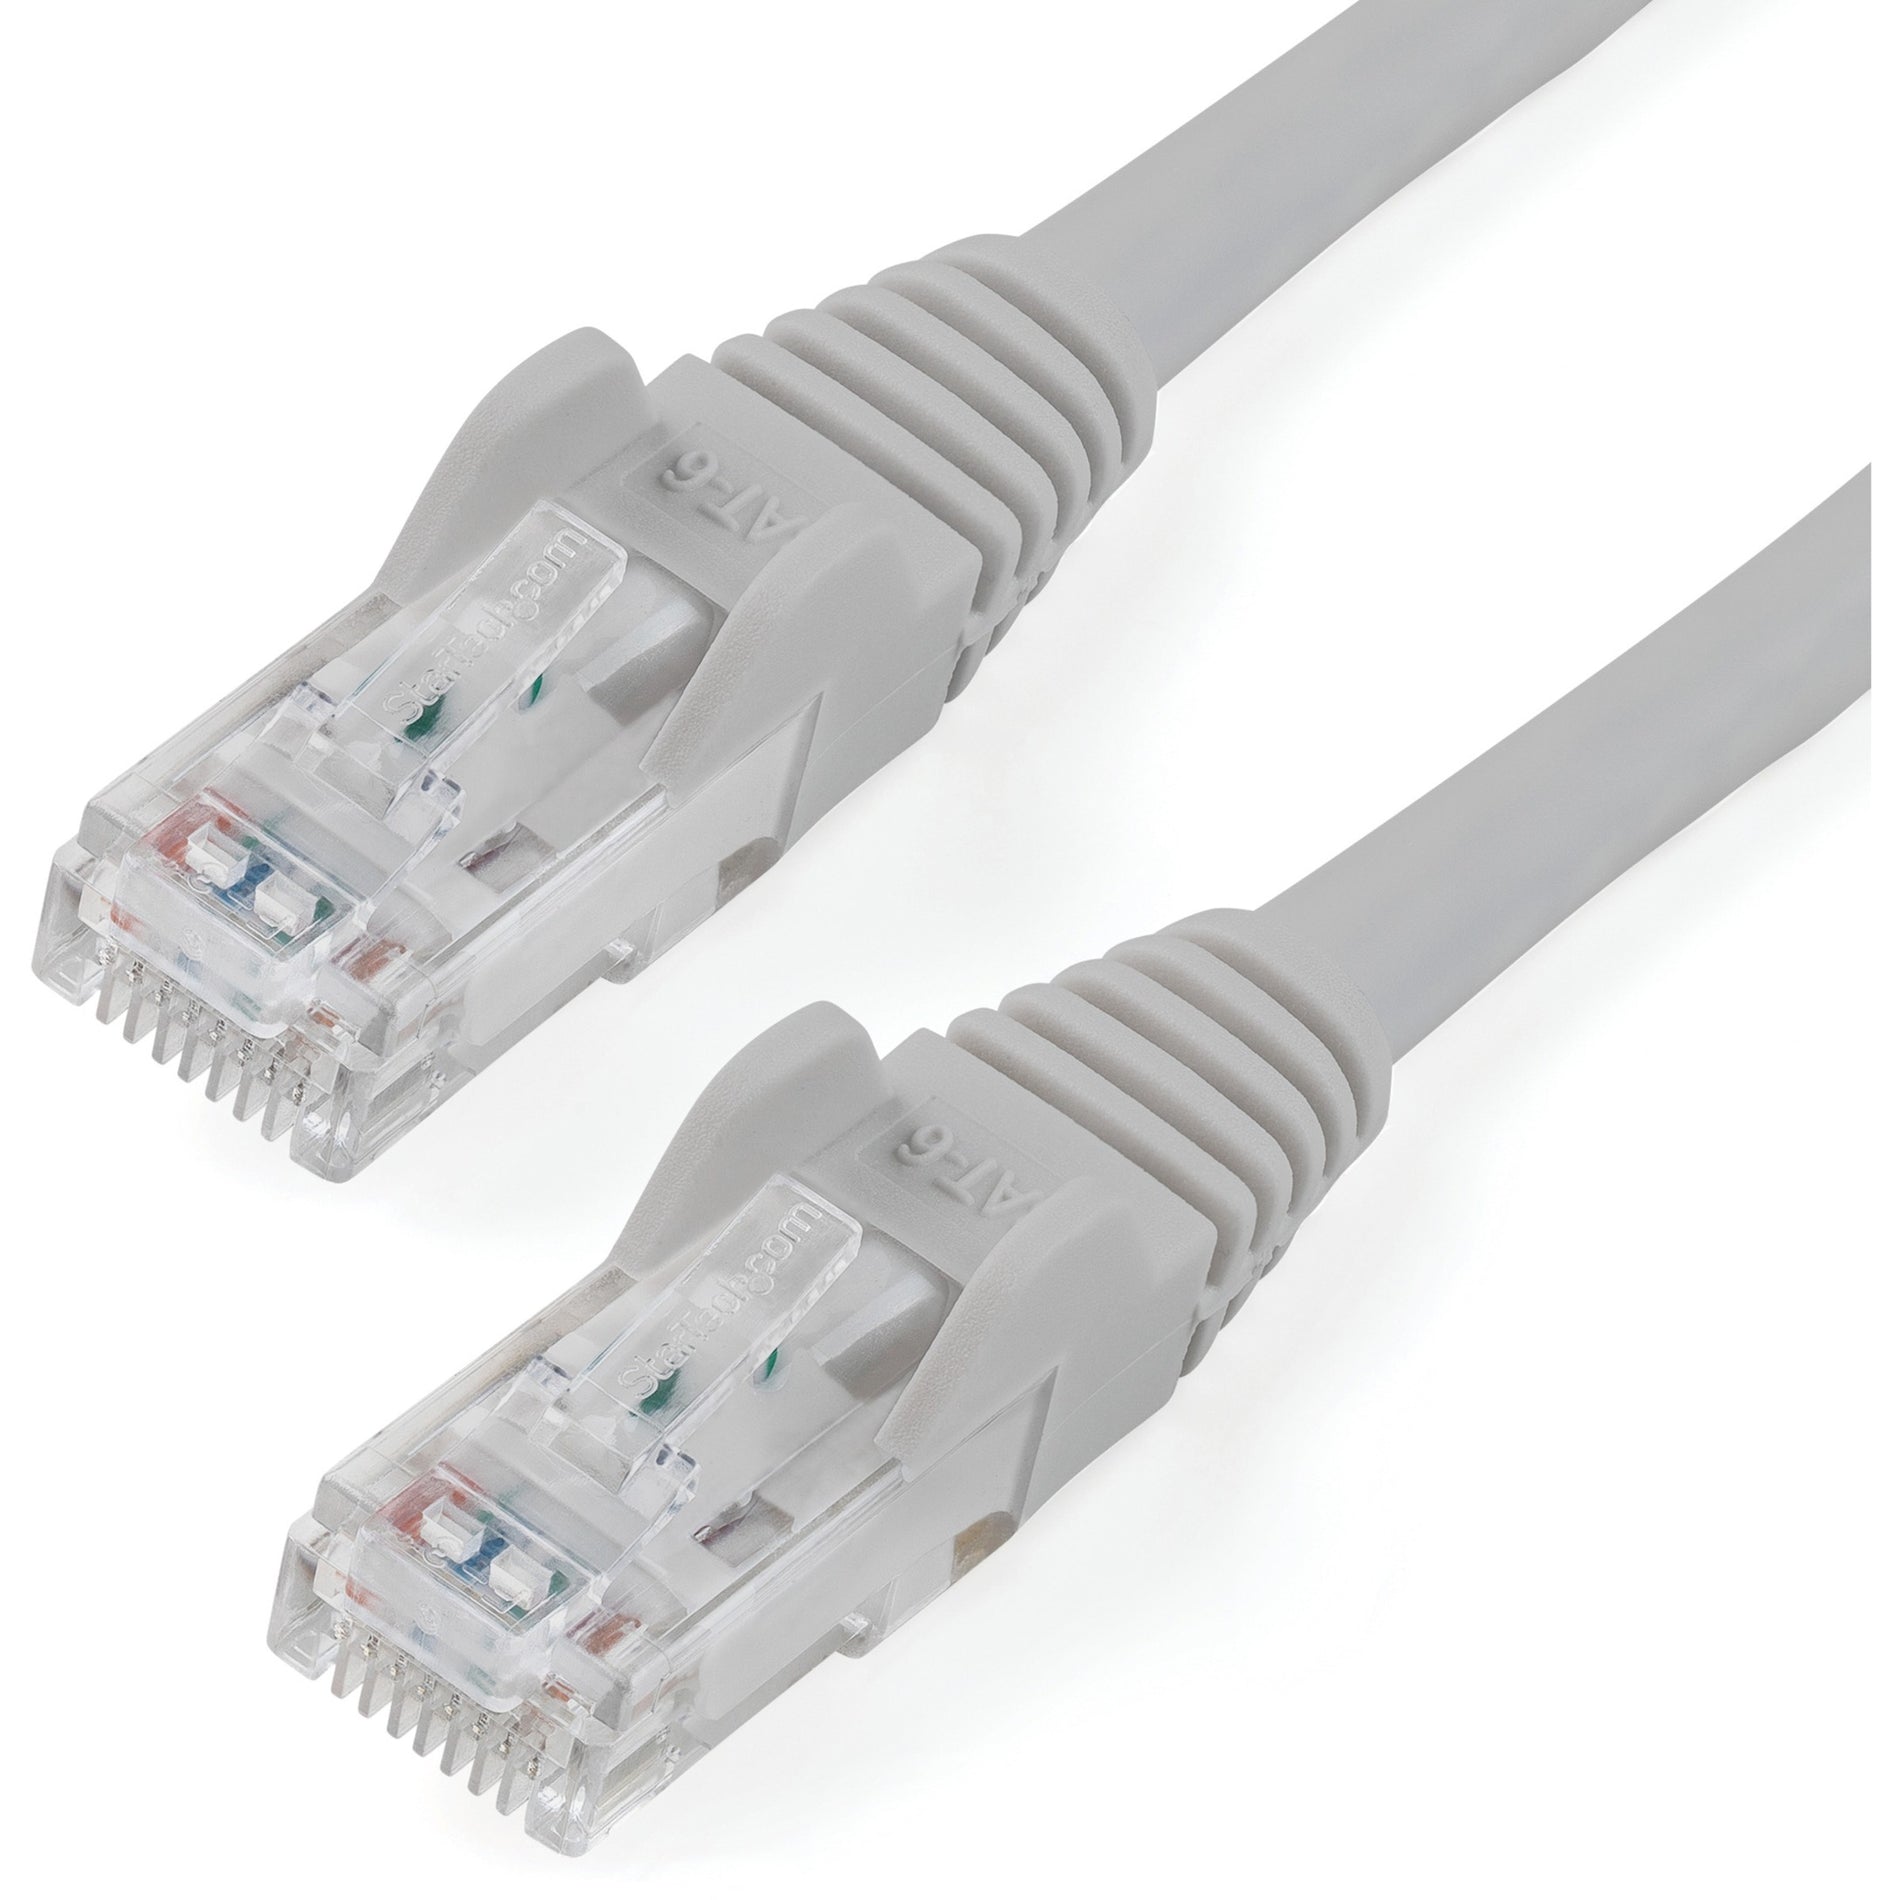 StarTech.com N6PATCH15GR 15 ft Gray Snagless Cat6 UTP Patch Cable, 10 Gbit/s Data Transfer Rate, Lifetime Warranty